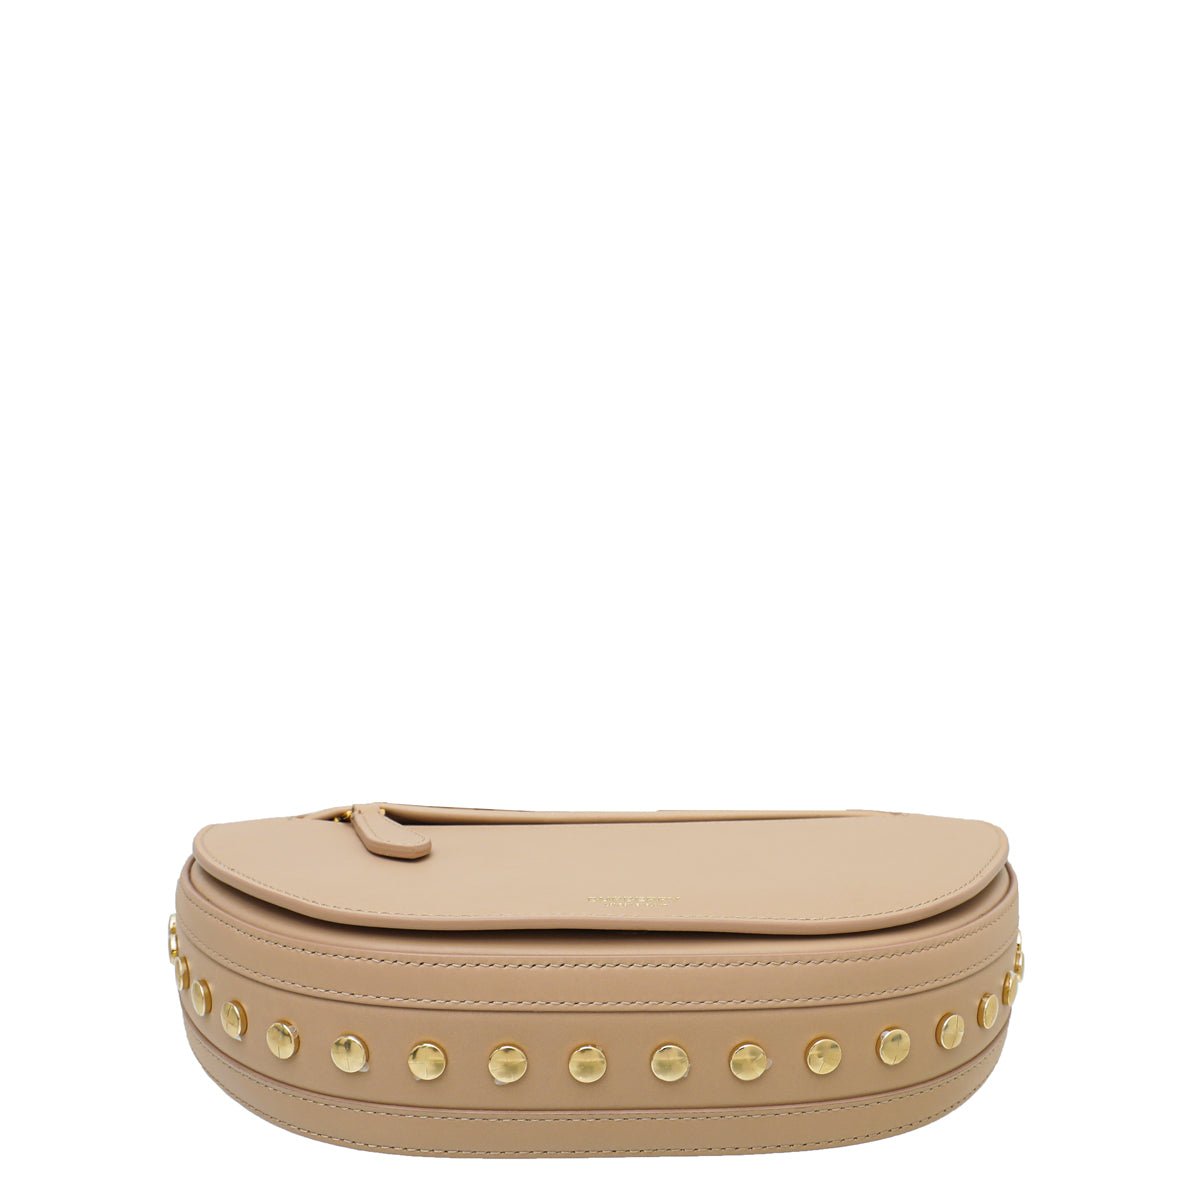 Burberry - Burberry Cool Beige Olympia Studs Flap Bag | The Closet